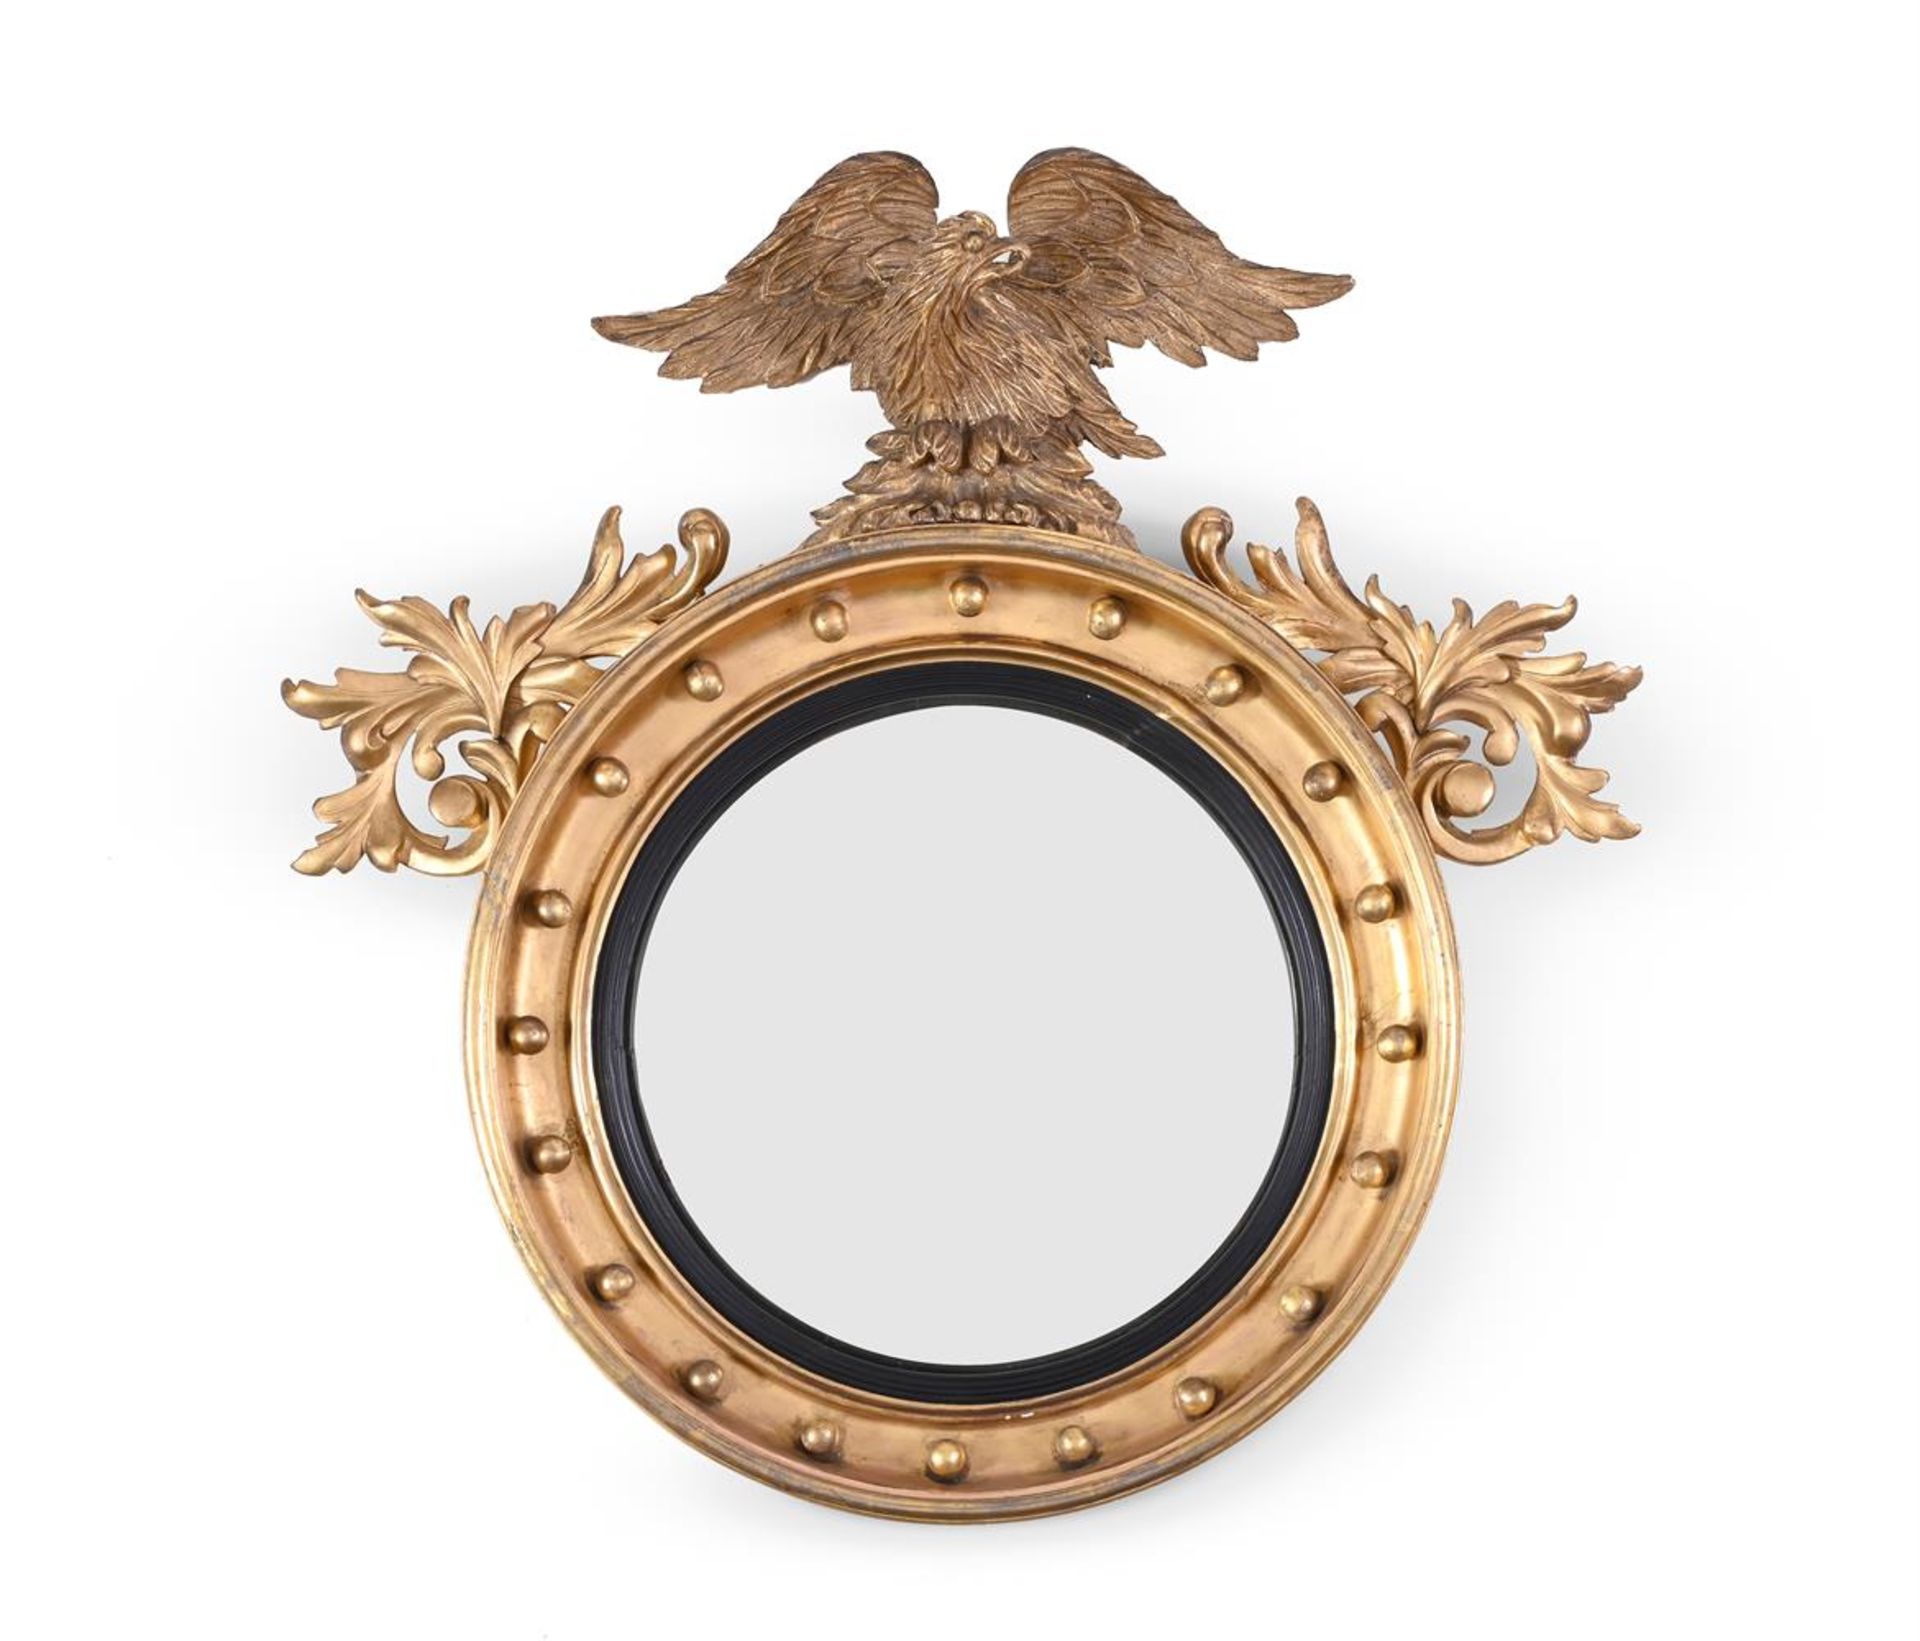 A GILTWOOD CONVEX WALL MIRROR IN REGENCY STYLE, SECOND HALF 19TH CENTURY